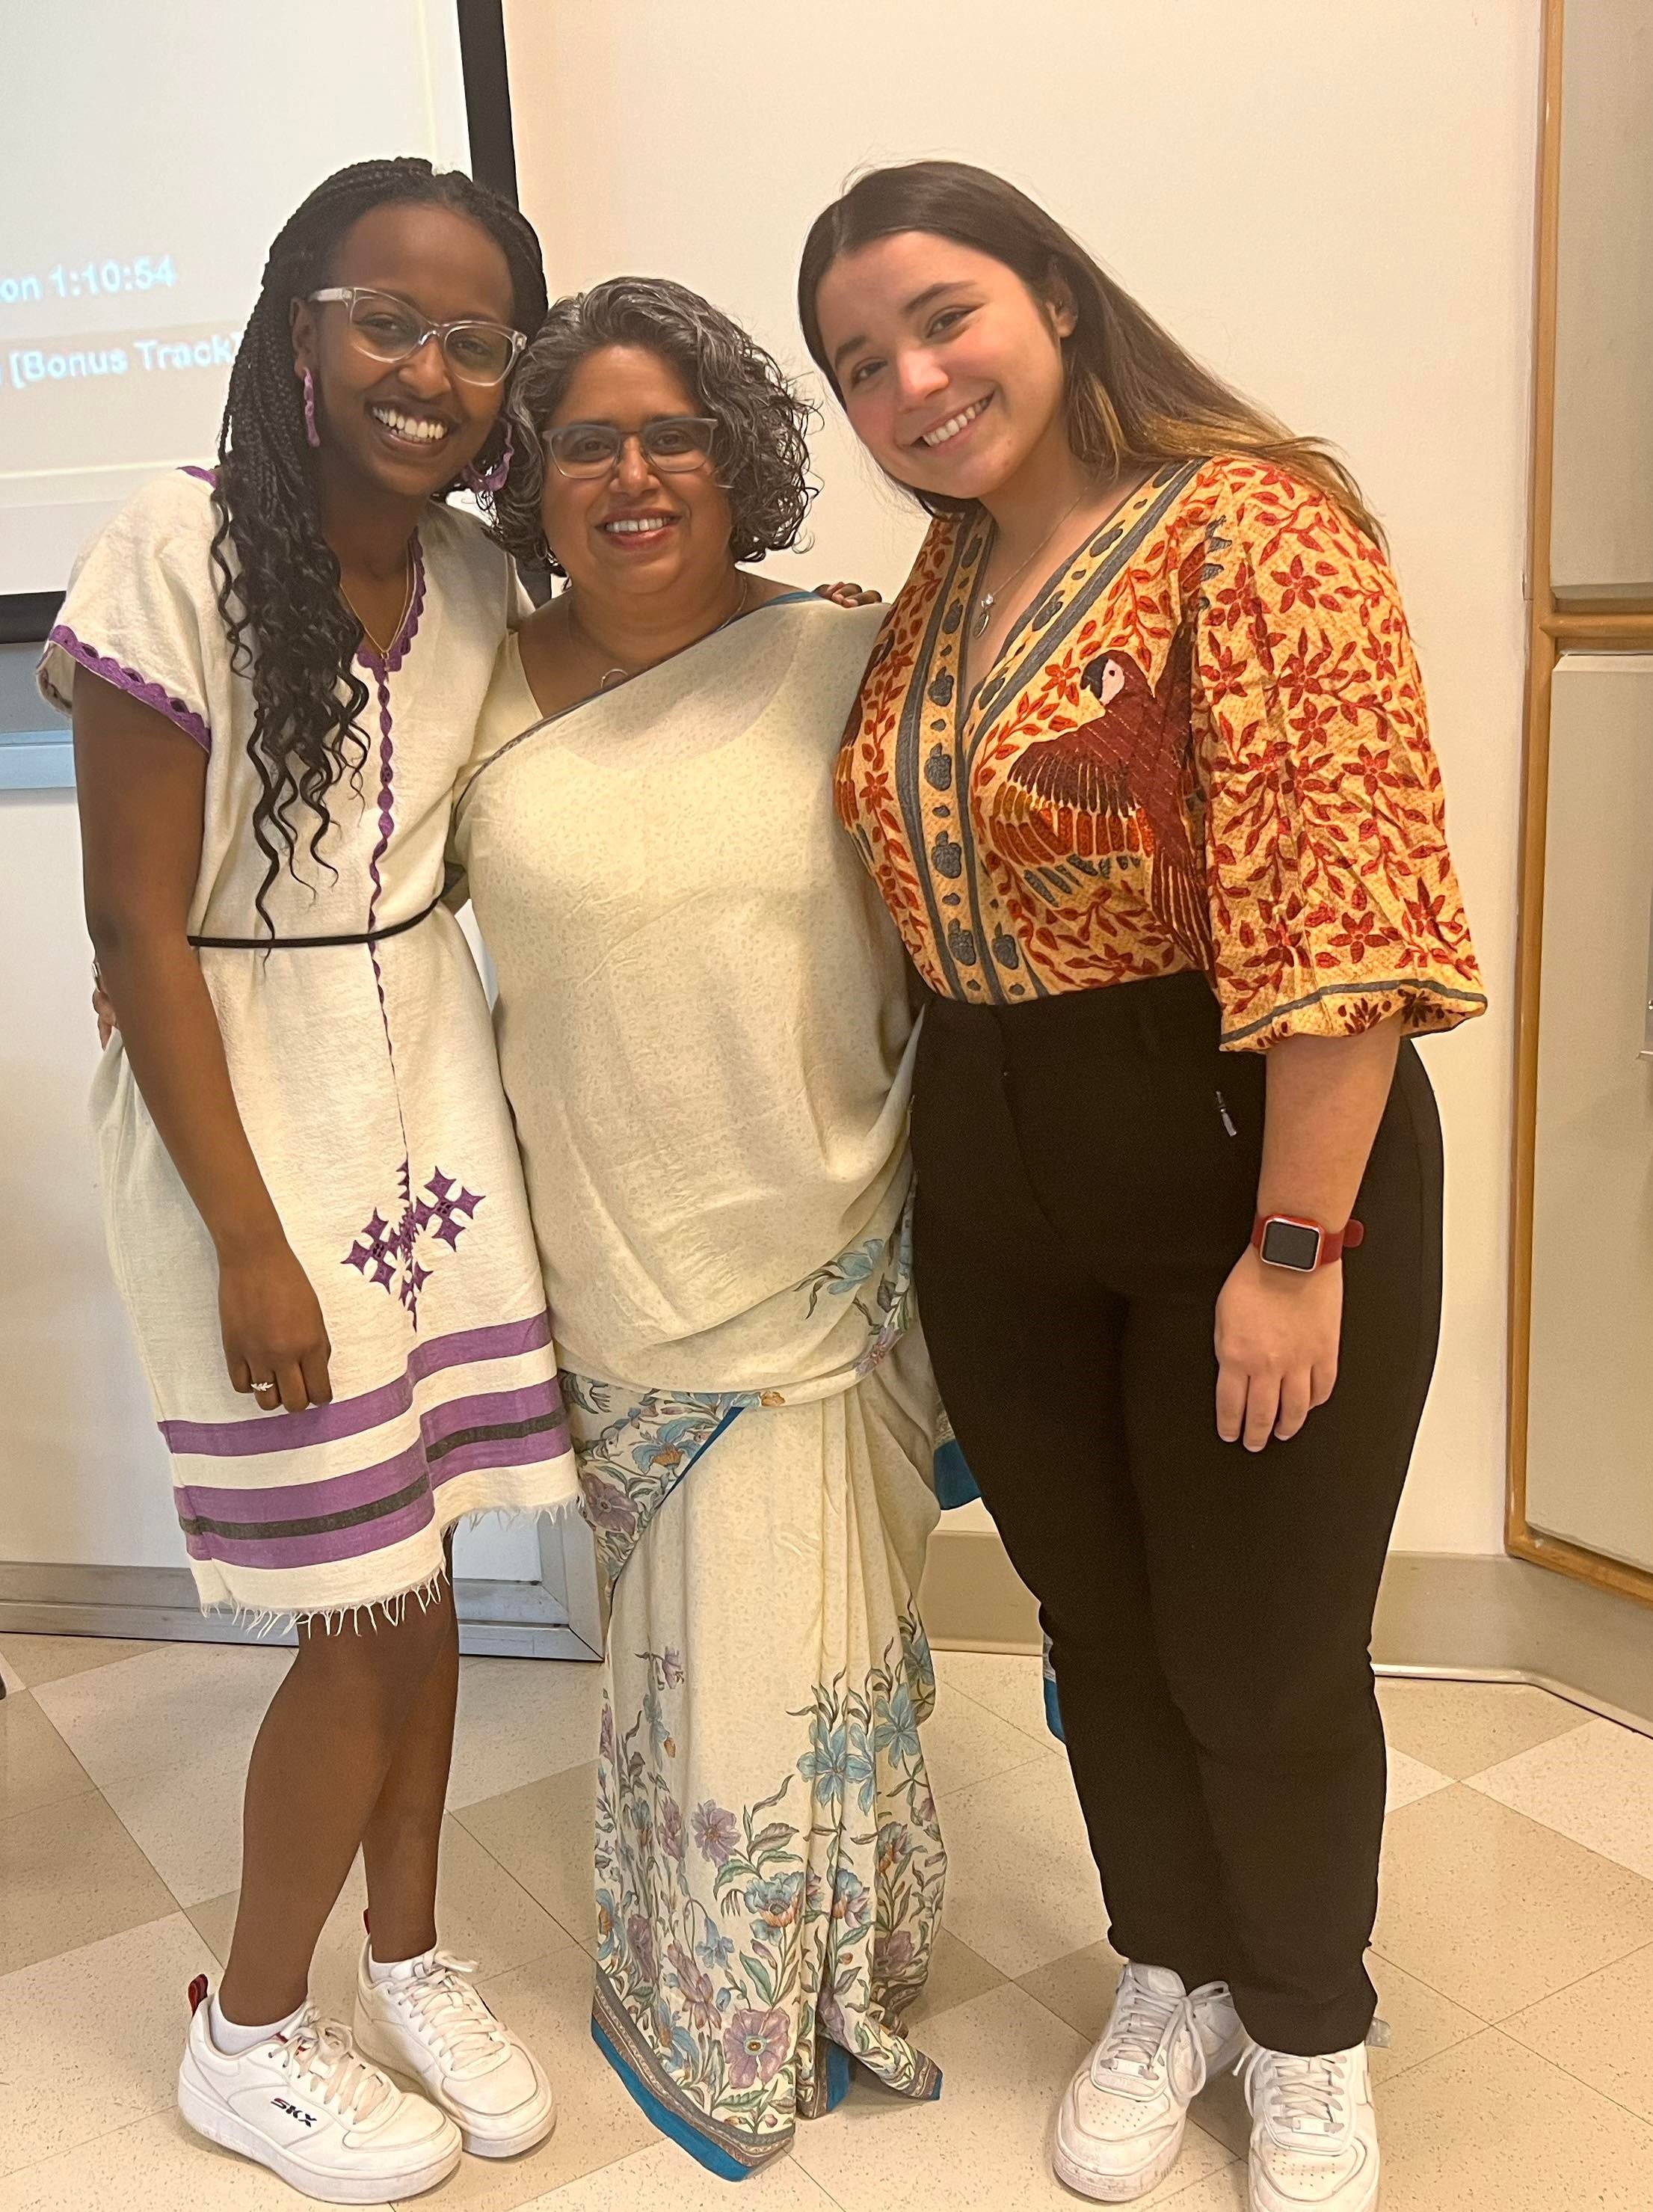  Dr. Bunjun with students Fisson Tibbo (at left) and Fernanda Matos (at right), who were emcees at the 5th annual Critical Indigenous, Race and Feminist Studies Conference at Saint Mary’s. 